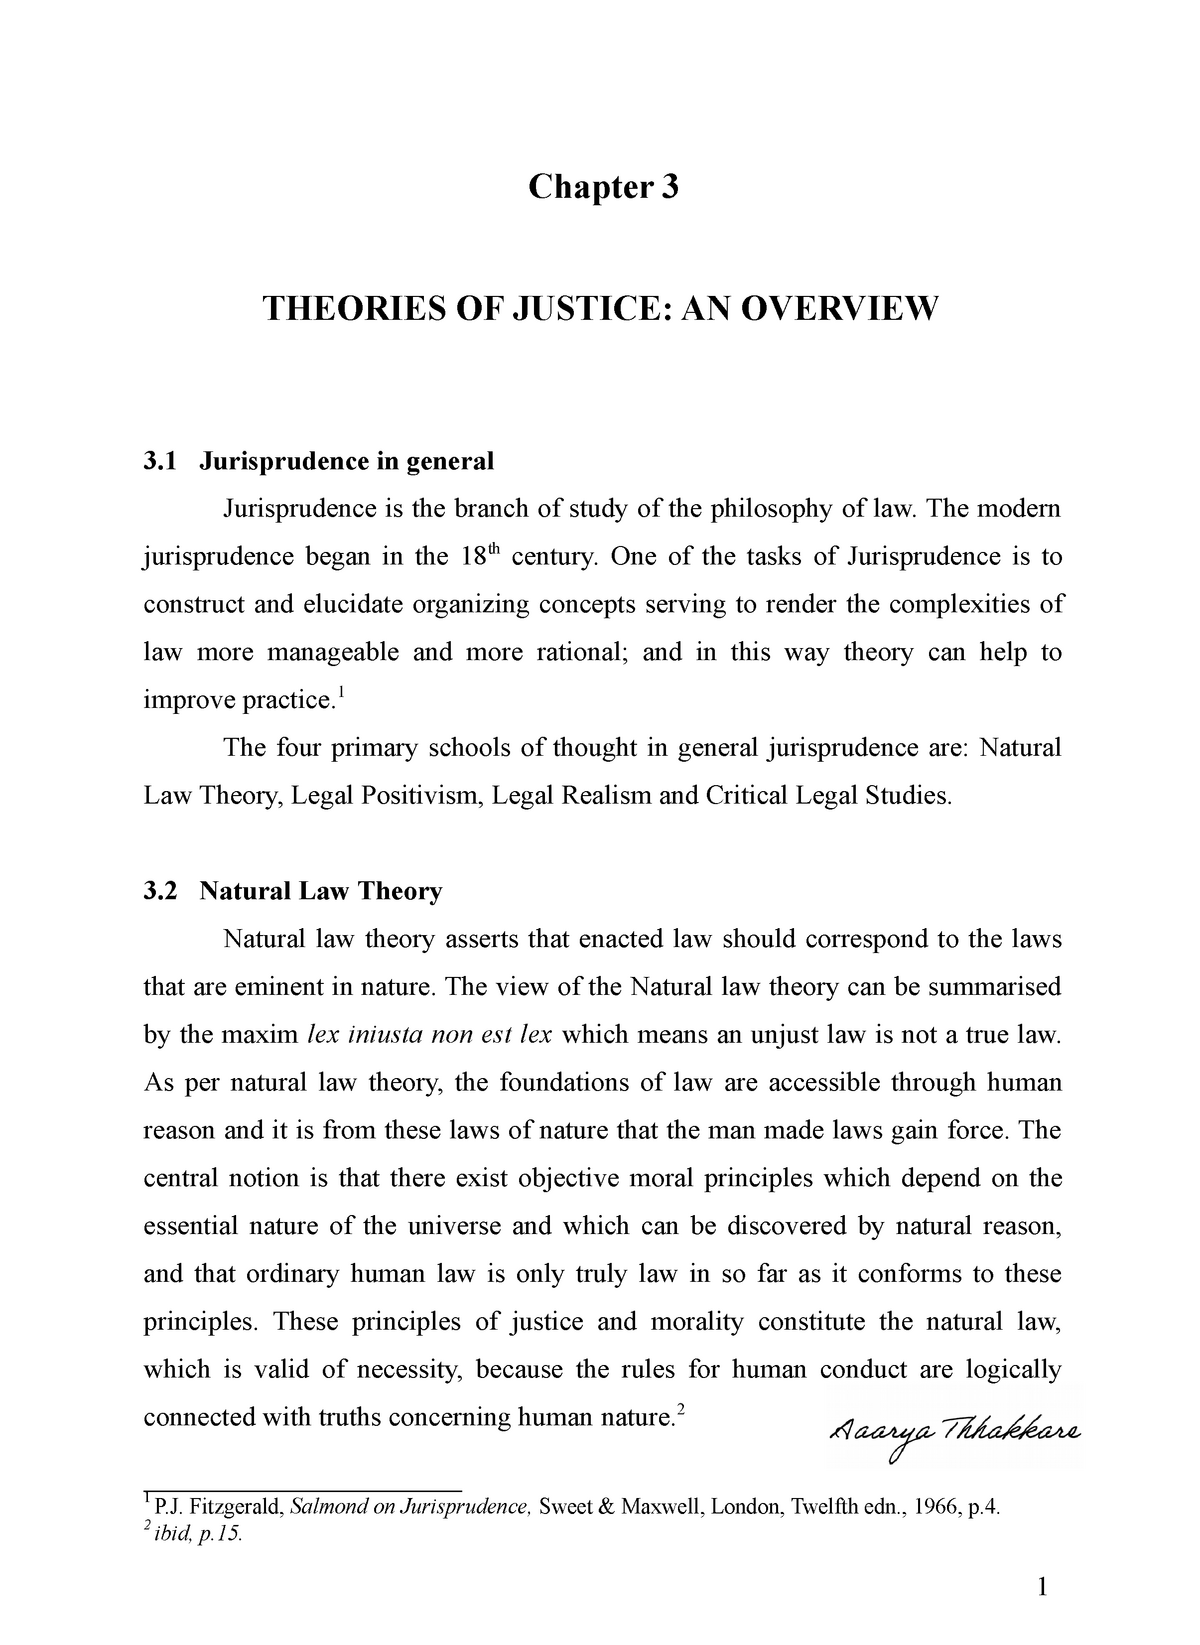 case study related to jurisprudence